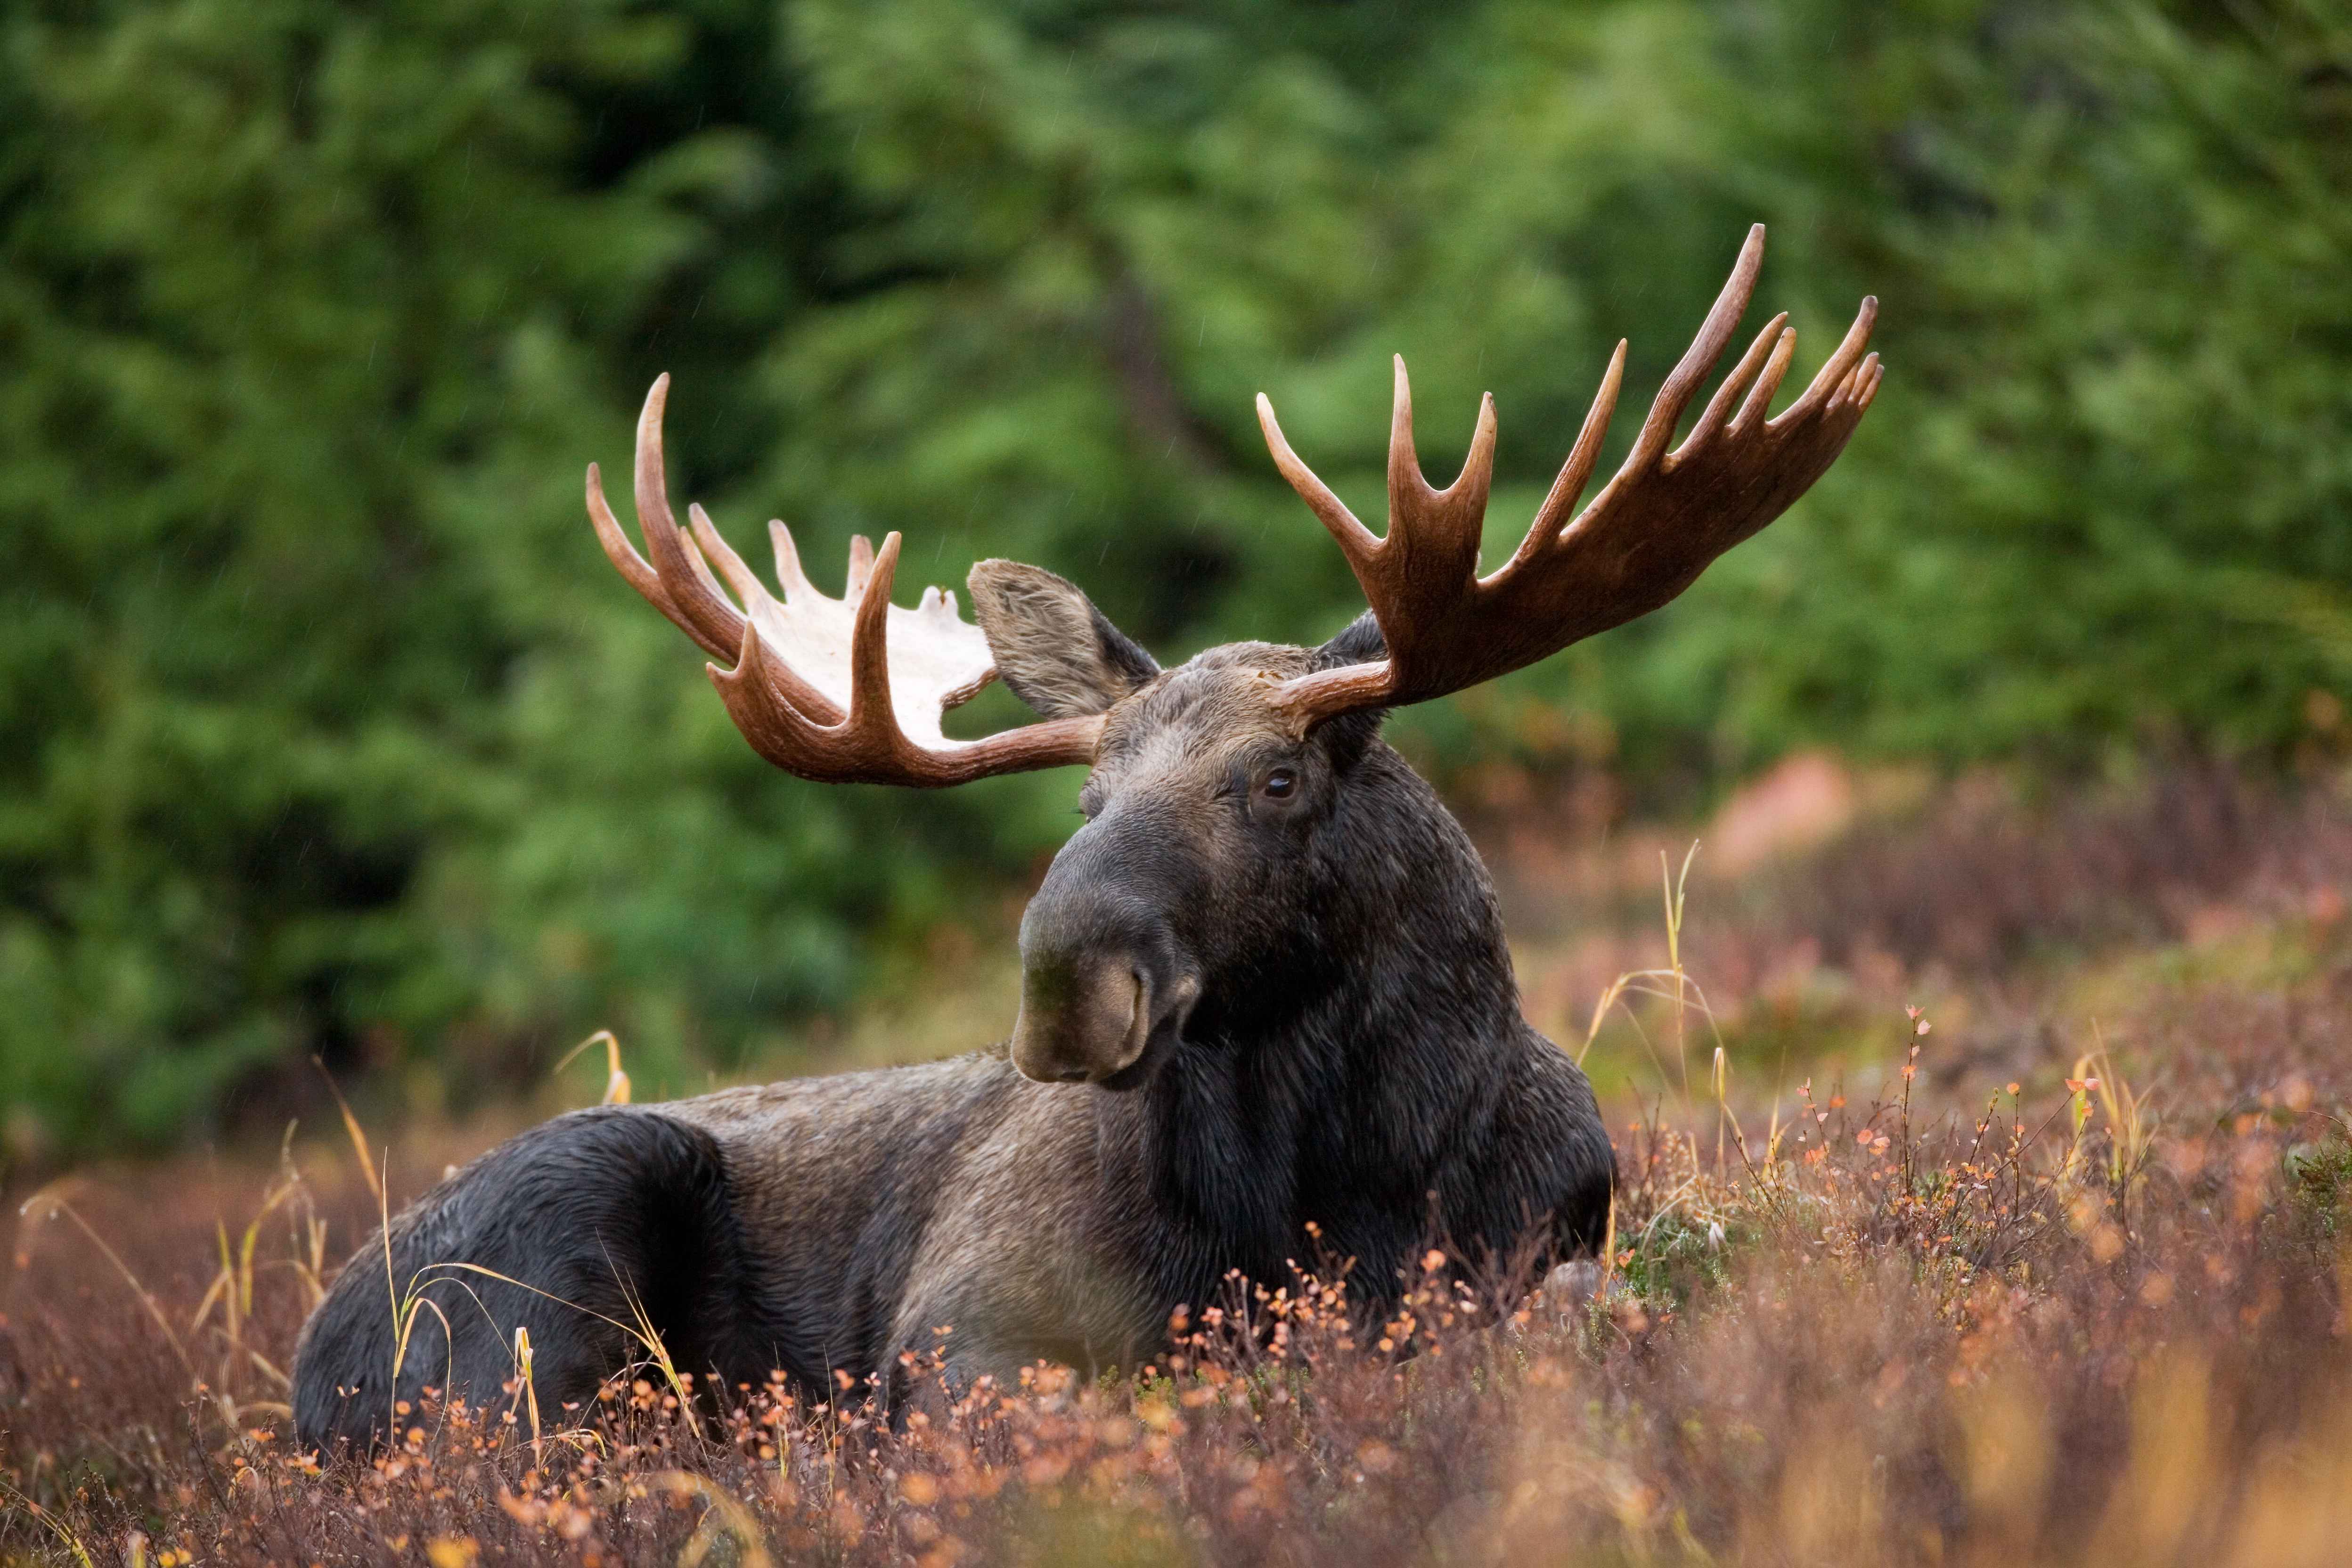 A male moose takes a rest in a field during a light rainshower